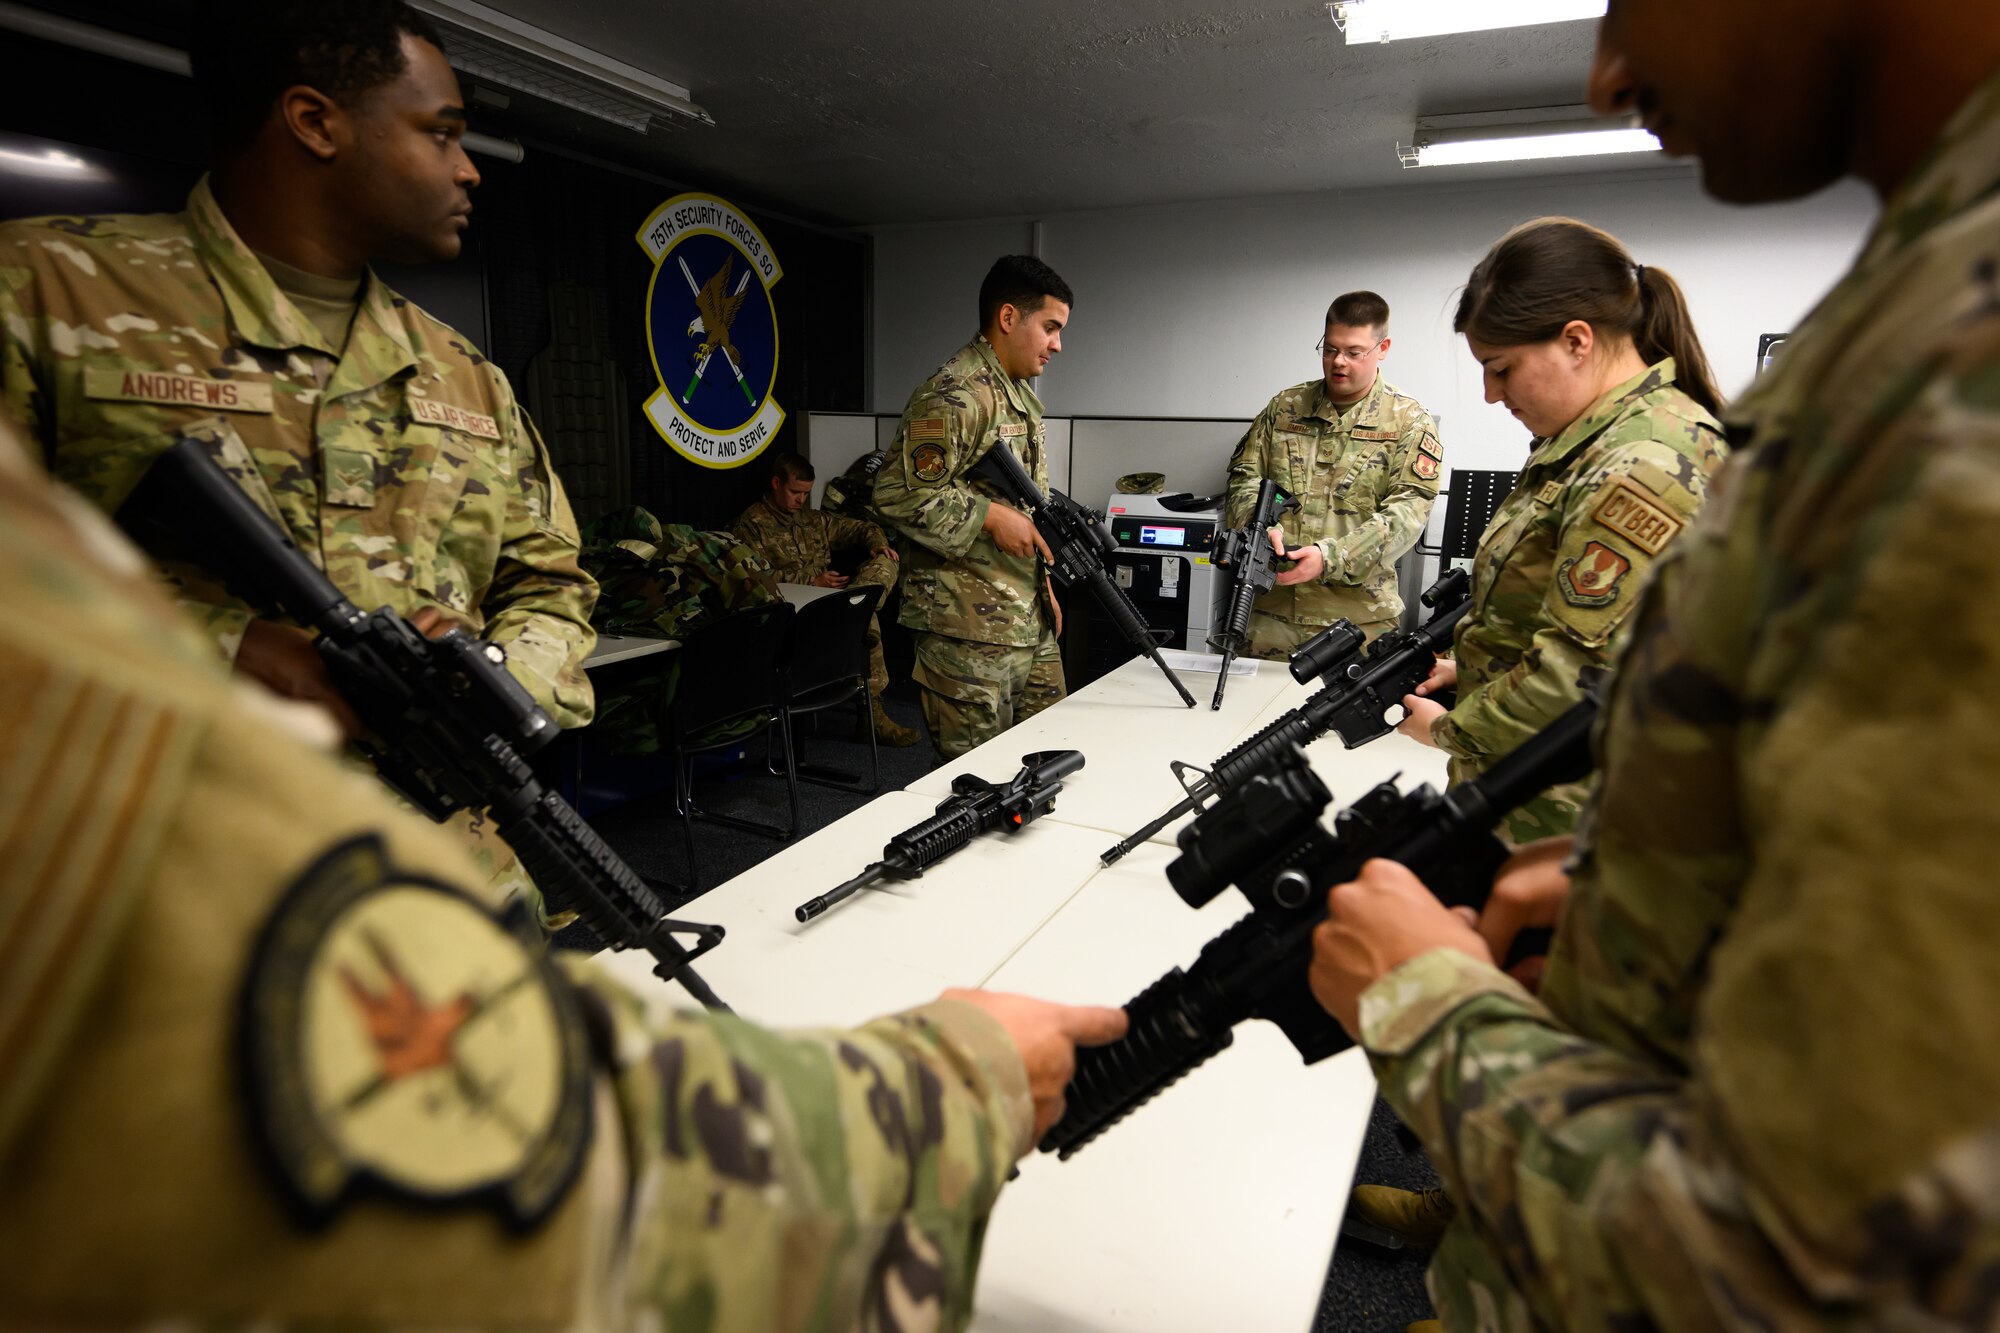 Center, Tech. Sgt. Ronald Smith, 75th Security Forces Squadron, instructs Airmen on weapons handling during an Ability to Survive and Operate rodeo (ATSO) at Hill Air Force Base, Utah, Sept. 13, 2022.